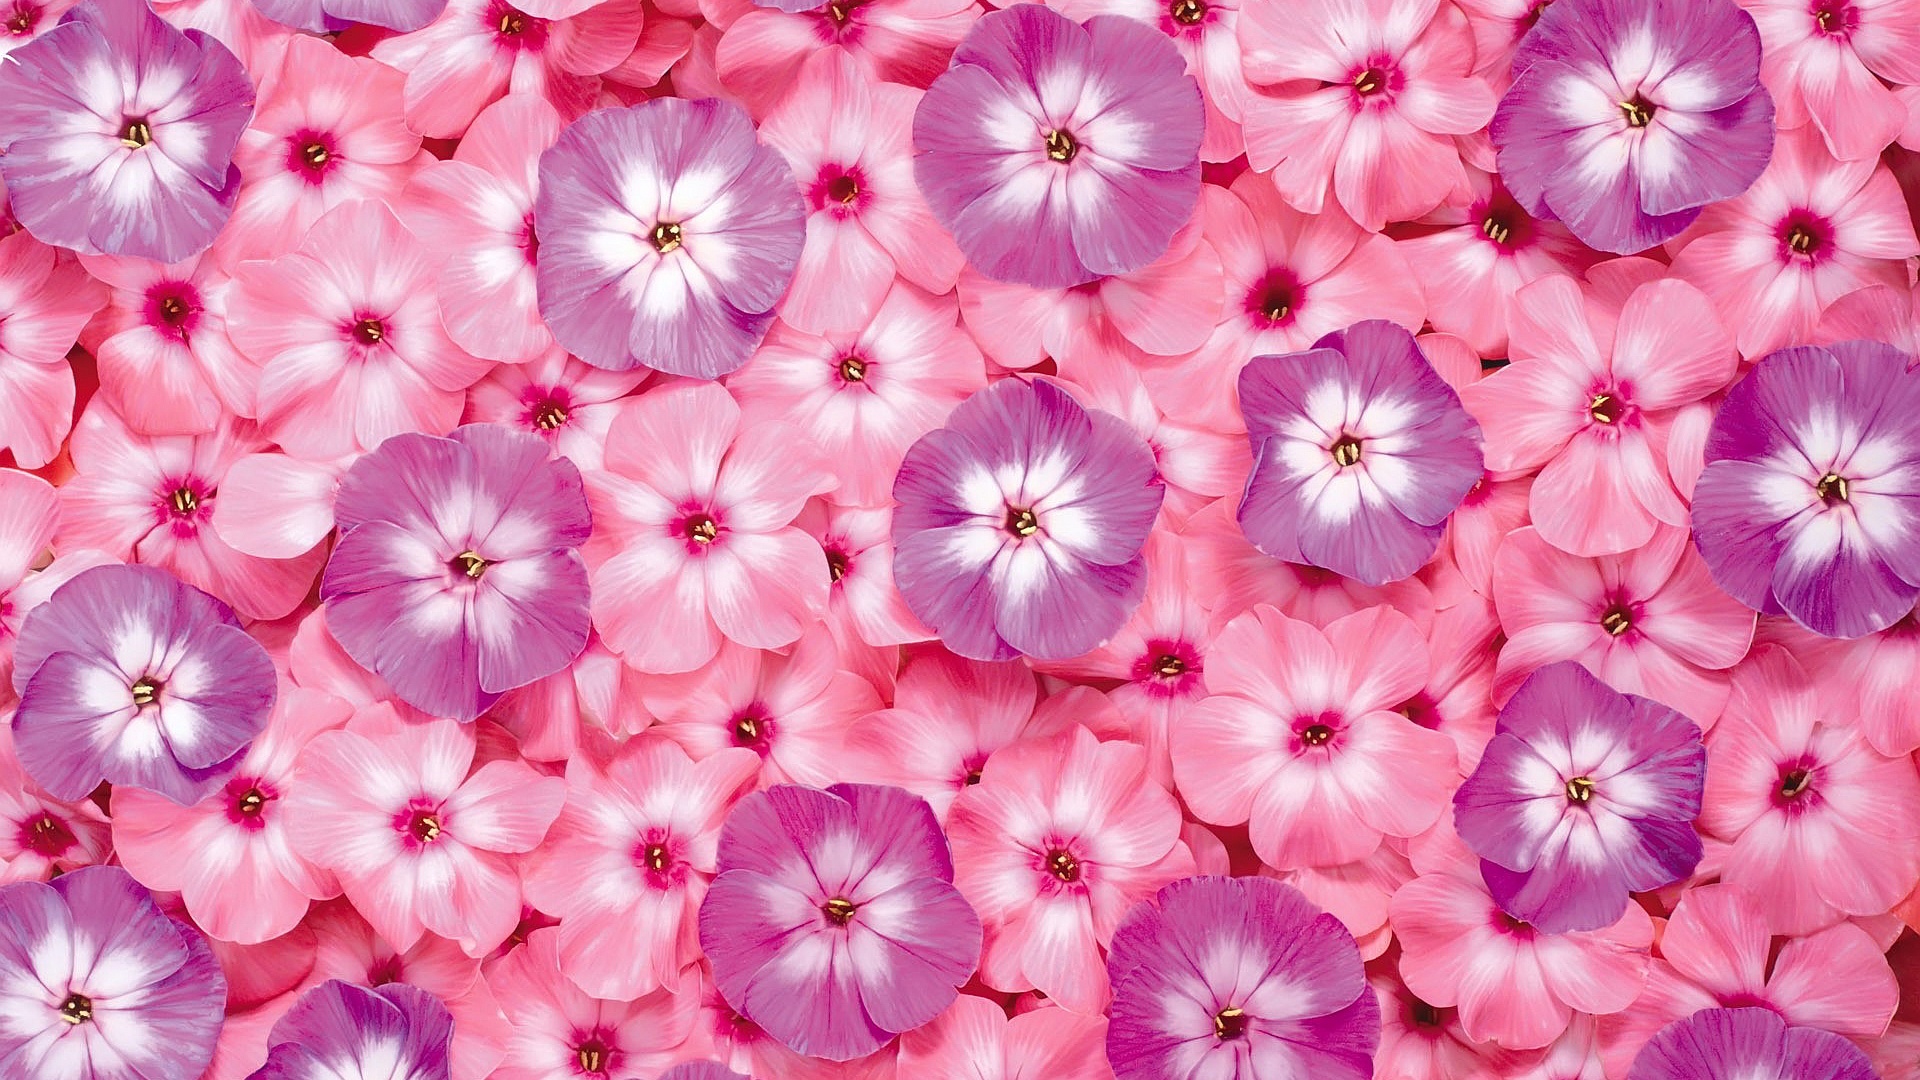 More Beautiful Pink Flowers Background Wallpaper Flgrx